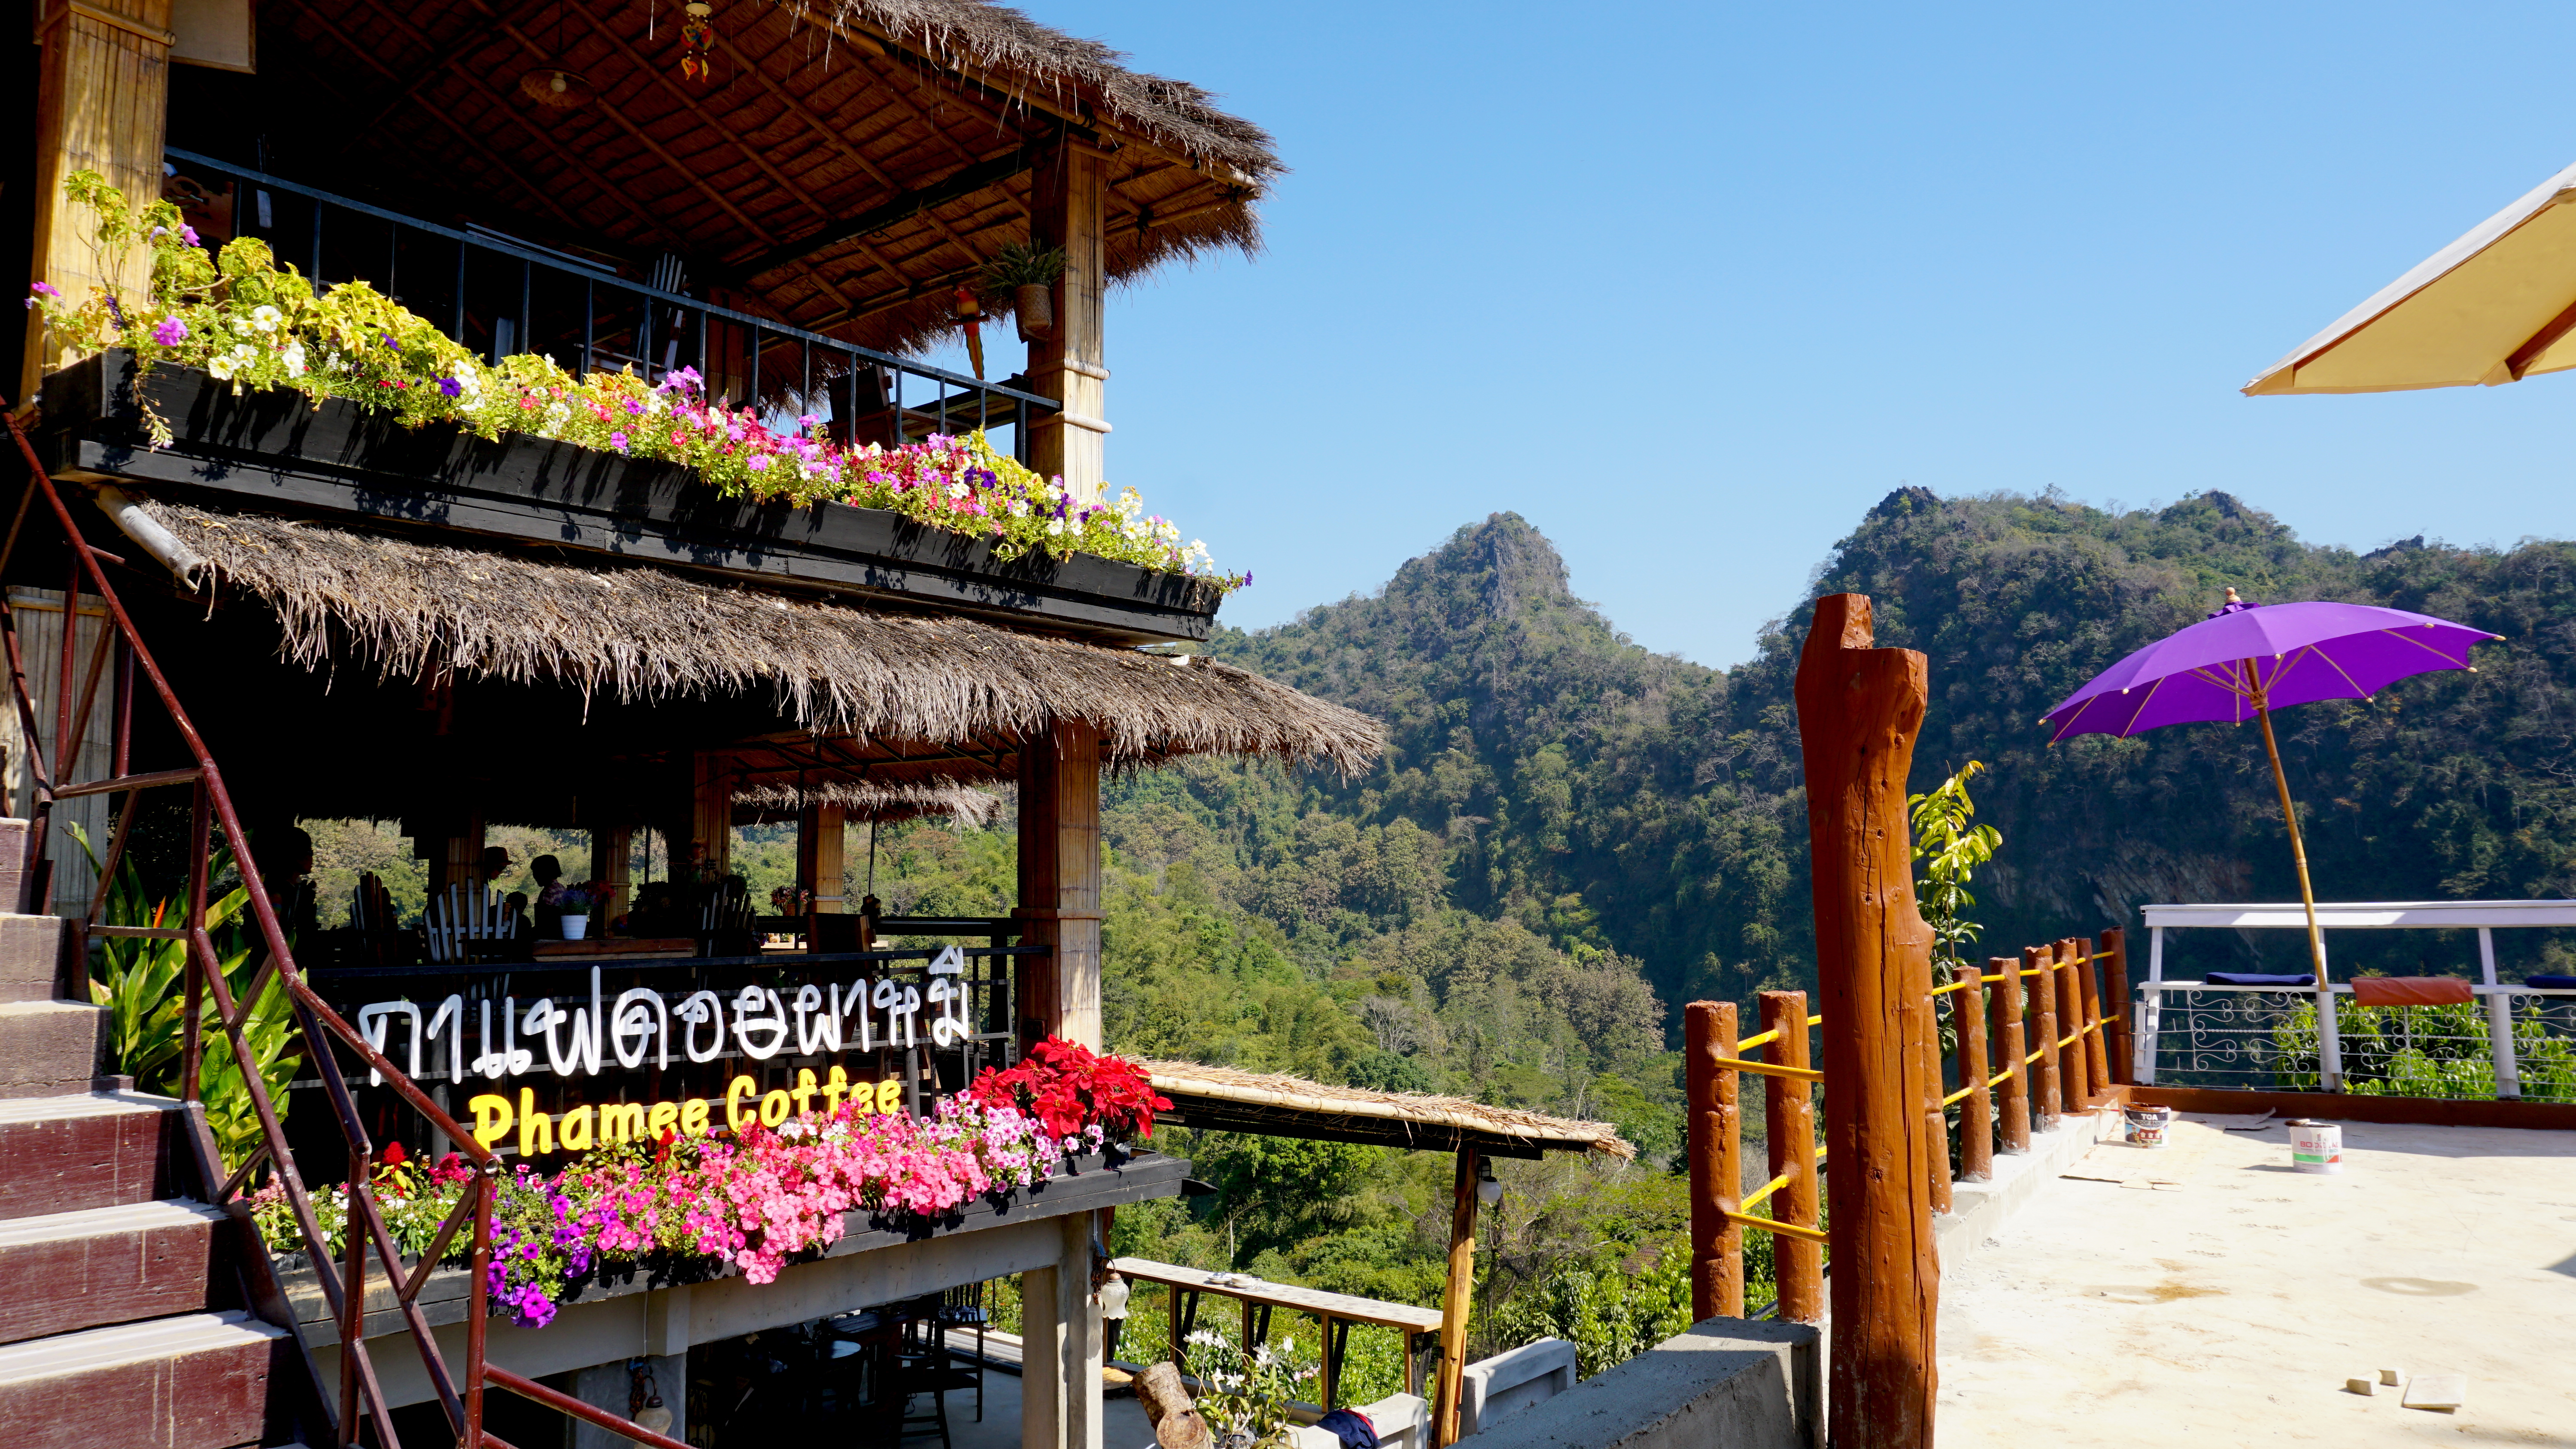 New homestays, coffee shops and souvenir stores have emerged, lending a bustling vibe to the town, which boasts stunning vistas of the surrounding mountains.